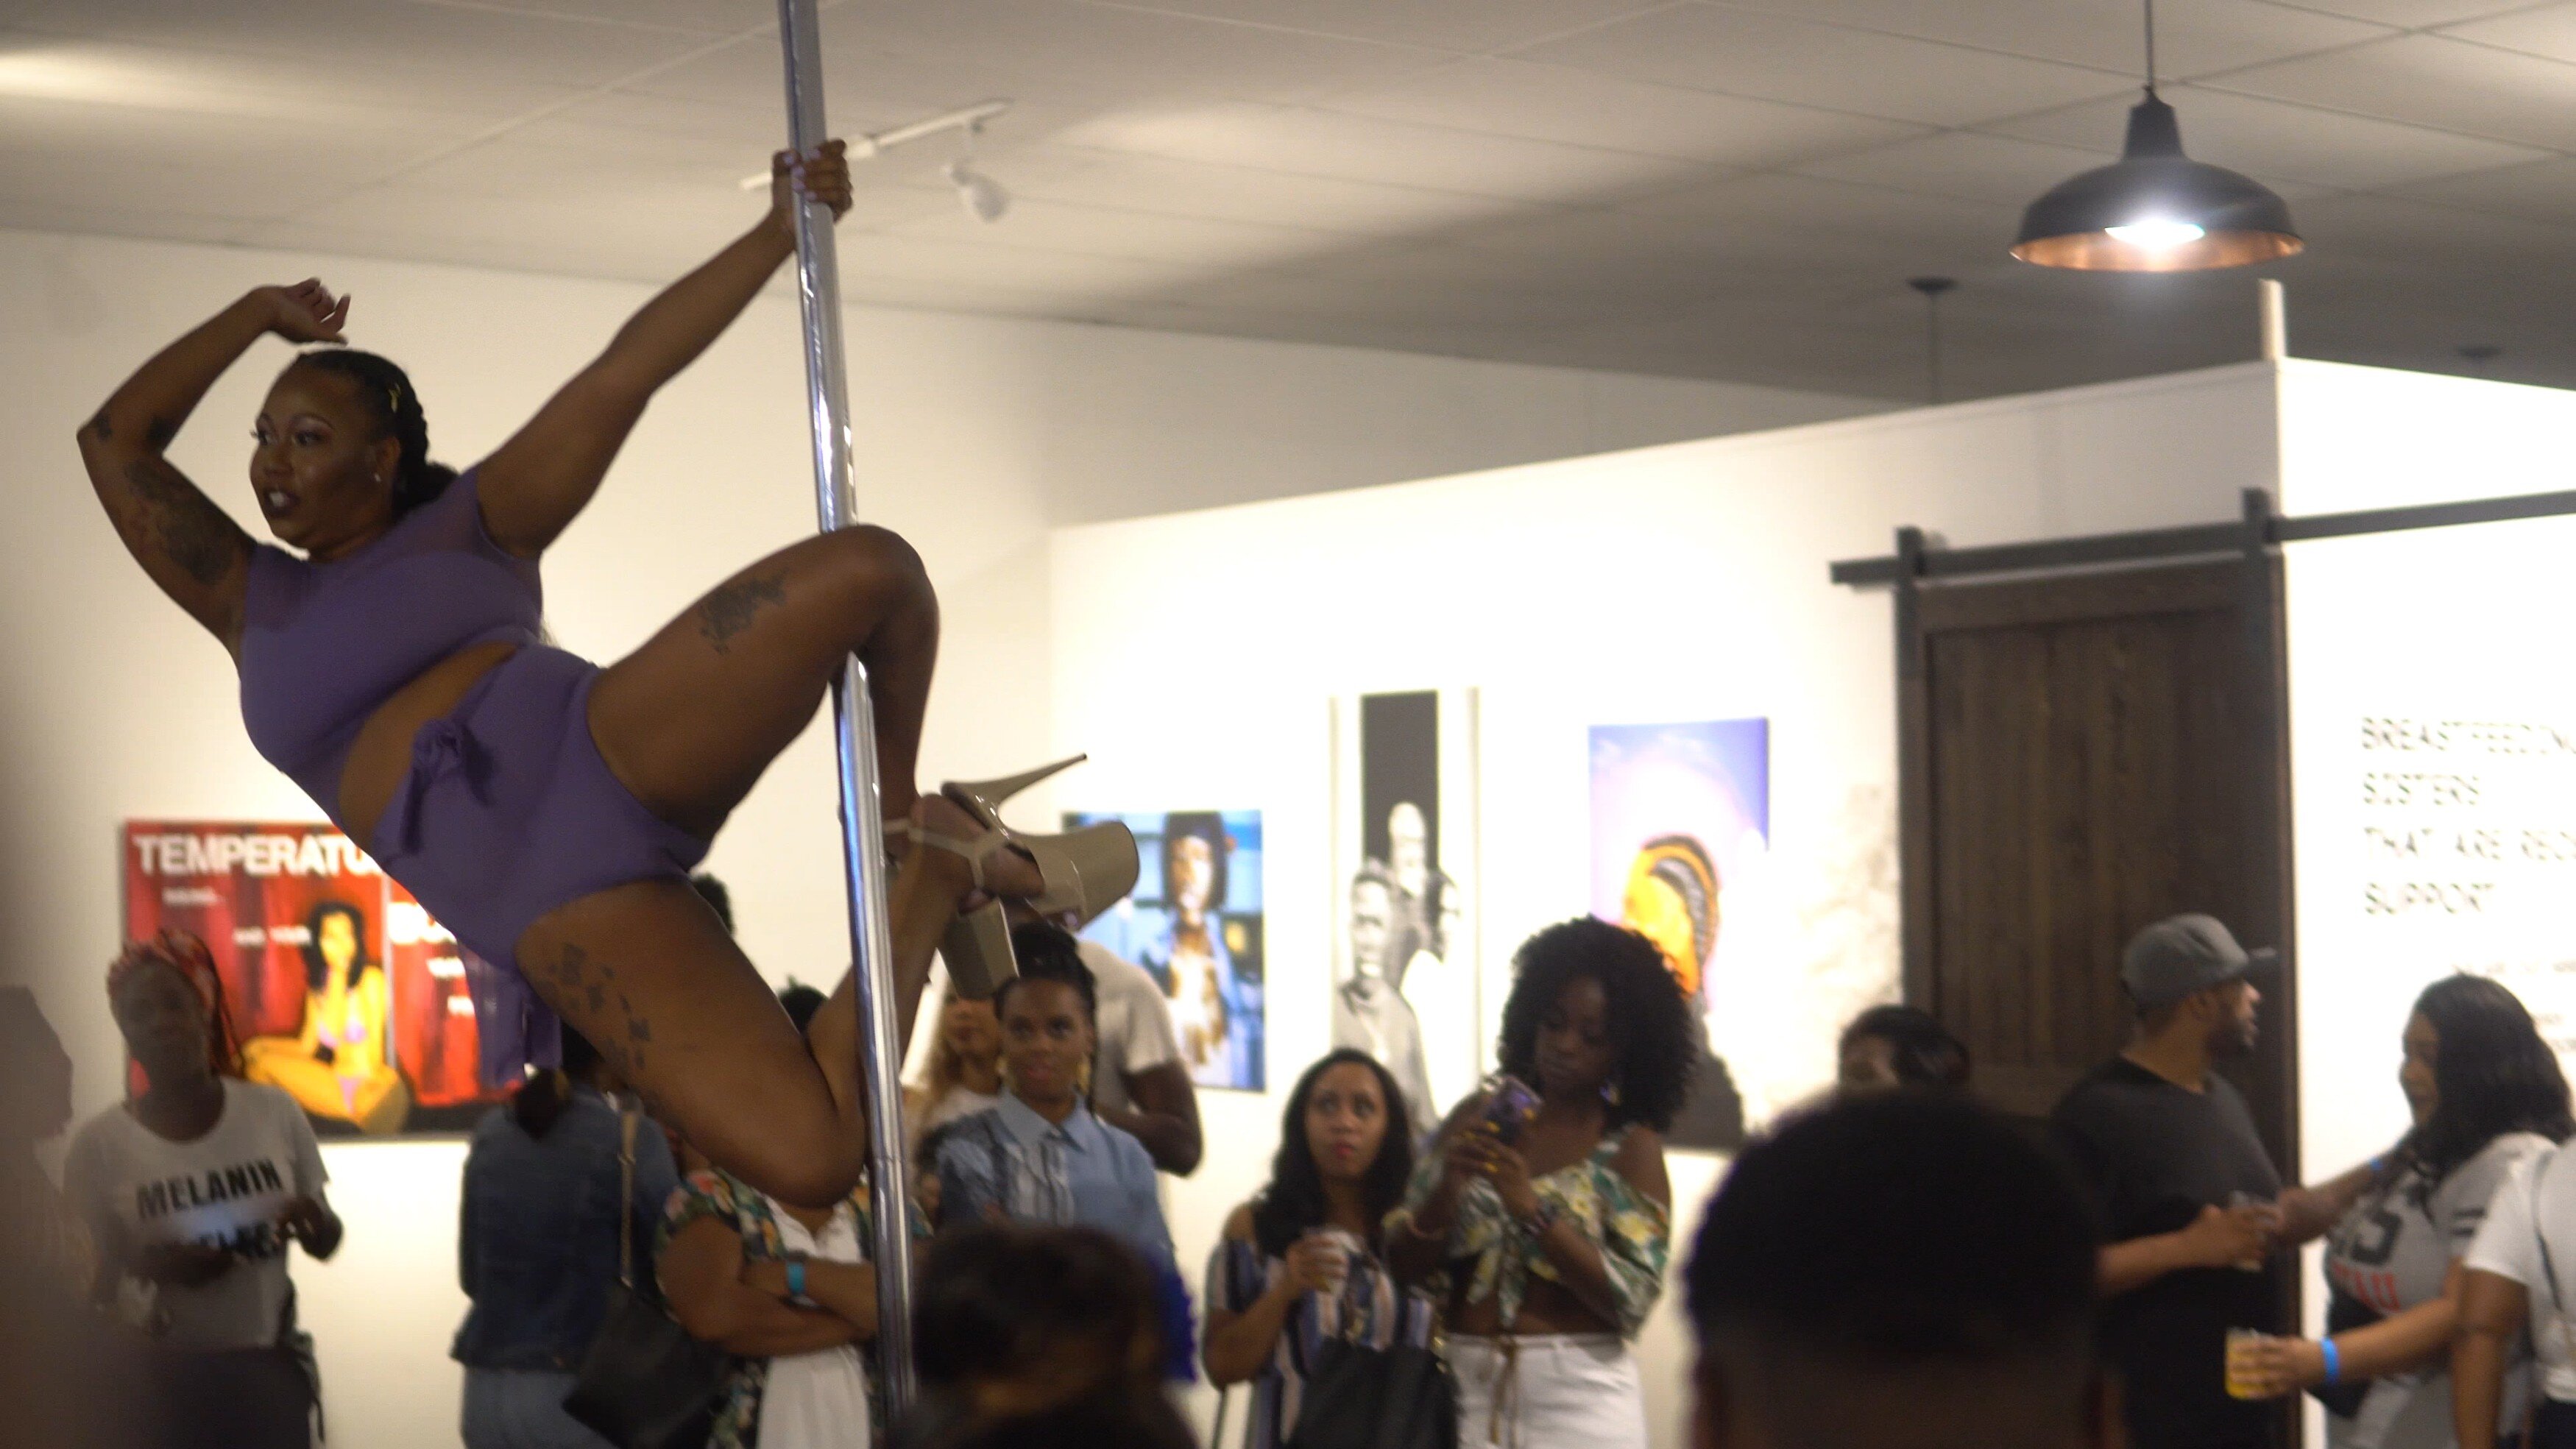 Last year's VISUALS & VIBES was held at The CMPLX in Orange Mound and featured traditional gallery art alongside art forms not typically found in a gallery show, like pole dancing. This year's event promises the same. (Christaian Williams)